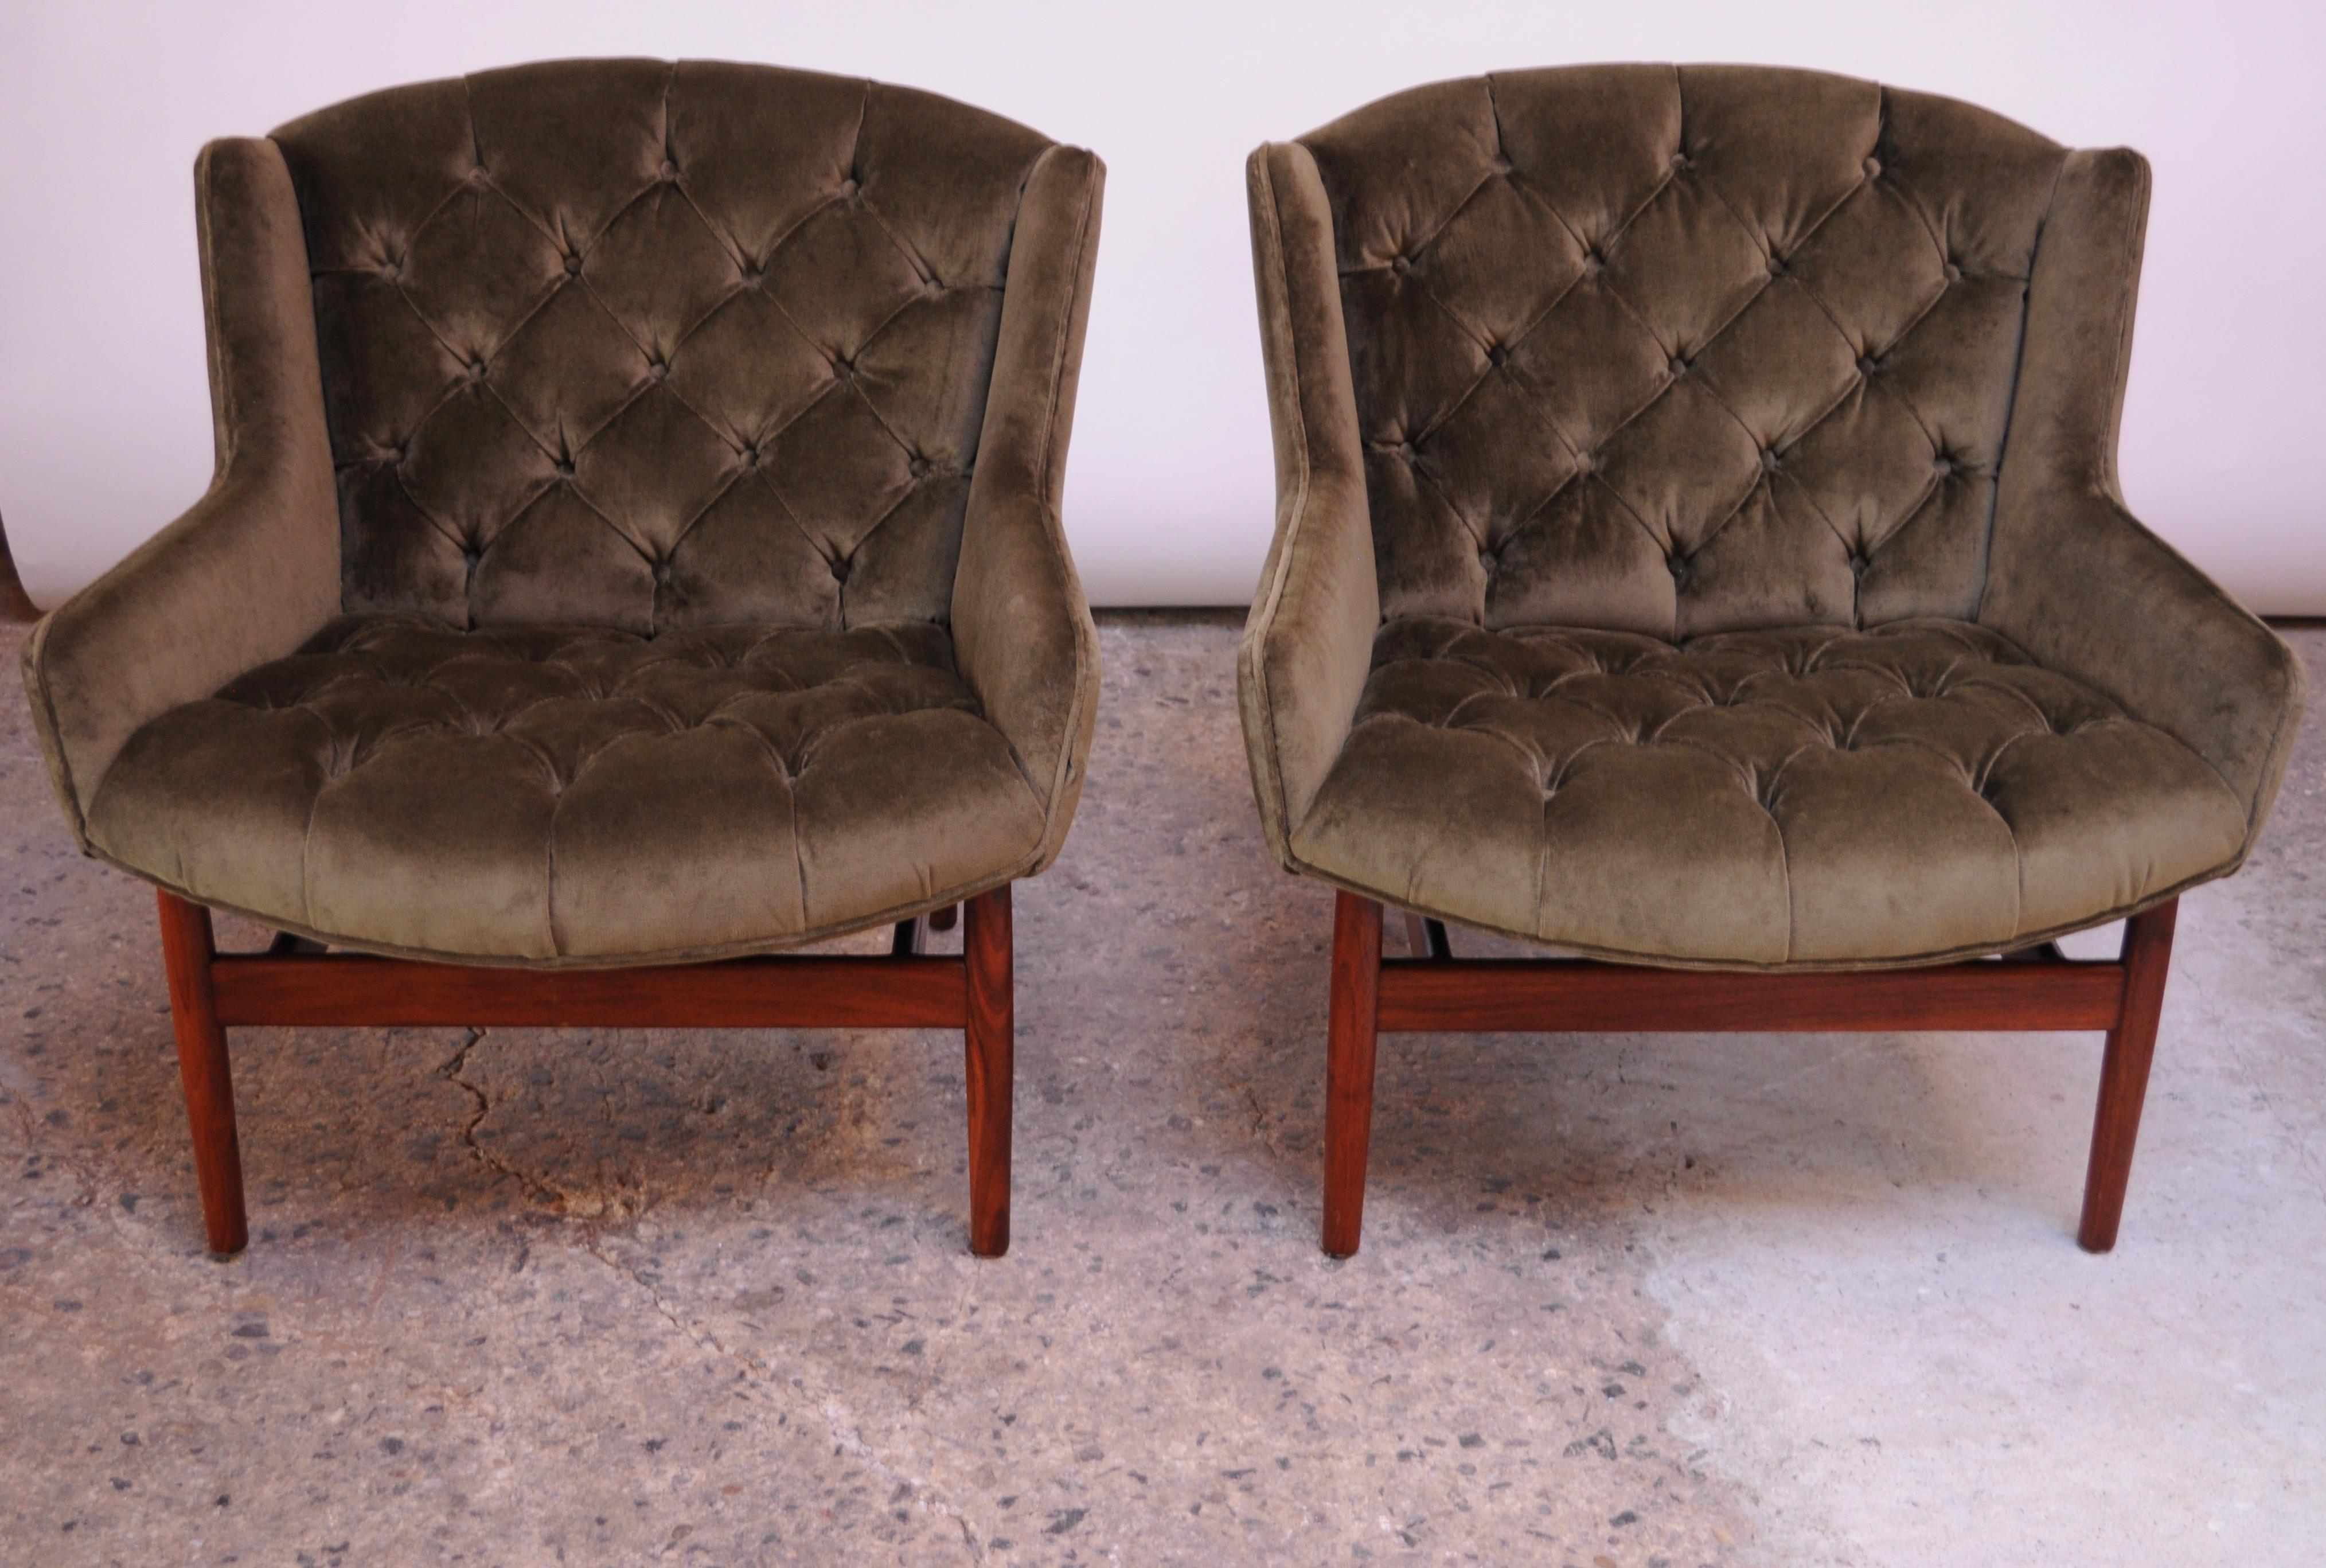 These exceptional Jens Risom Model 2137 lounge chairs supported by sculptural walnut bases are scarce examples of the 1961 design. 
They are relatively small in scale, though the seat was designed to be wide and spacious for added comfort. Features